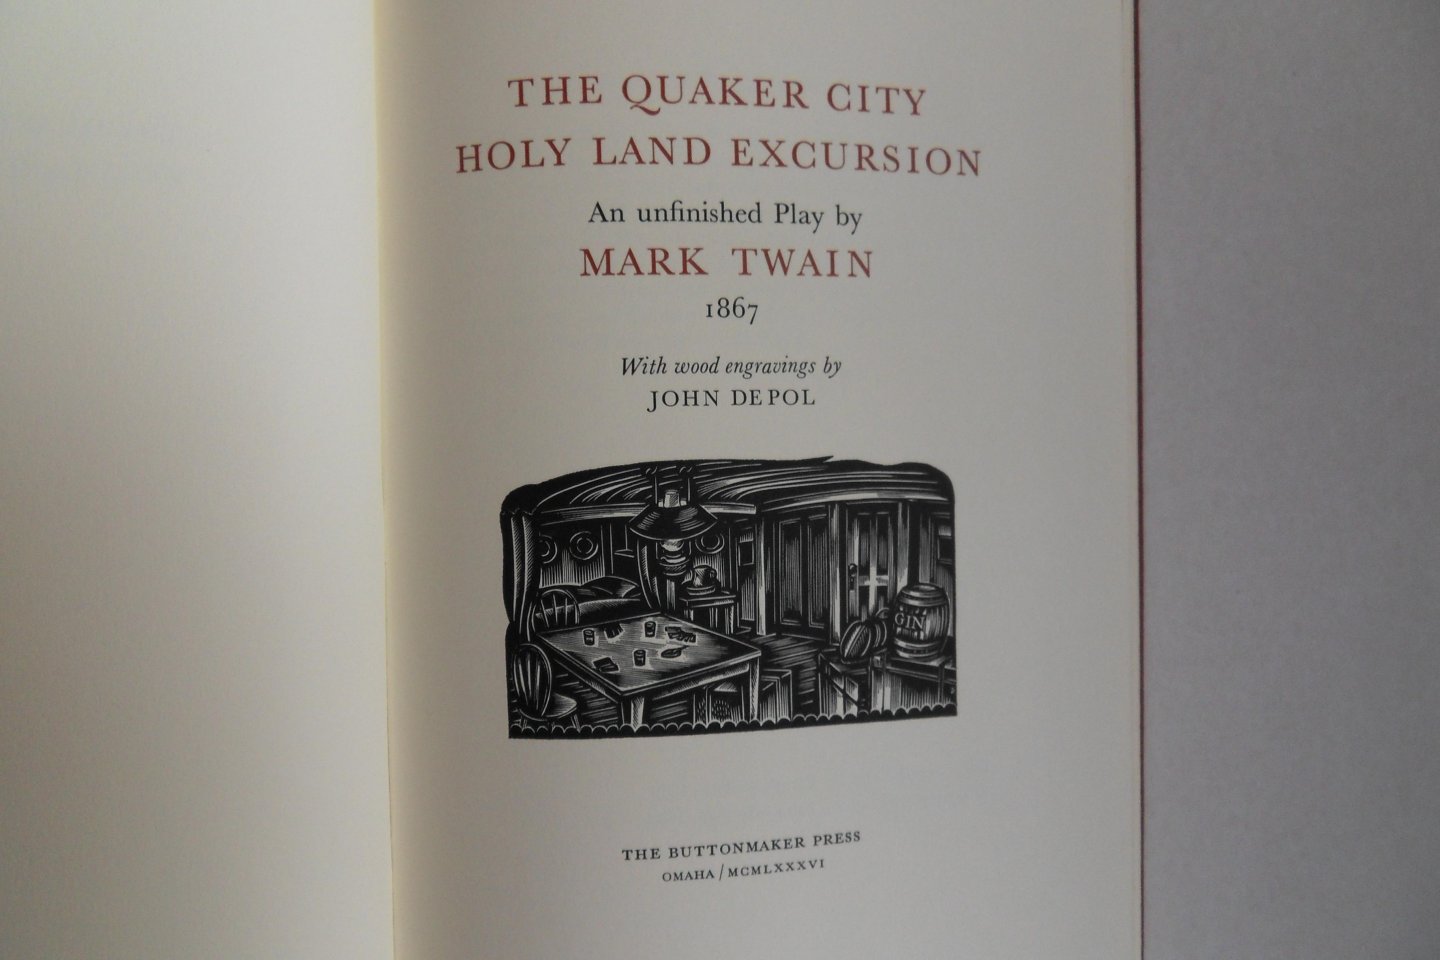 Twain, Mark. [ Signed by the artist John de Pol ]. - The Quaker City. - Holy Land Excursion. - An unfinished Play by Mark Twain, 1867. - With woodengravings by John de Pol. [ Genummerd ex.: 78 / 150 ].